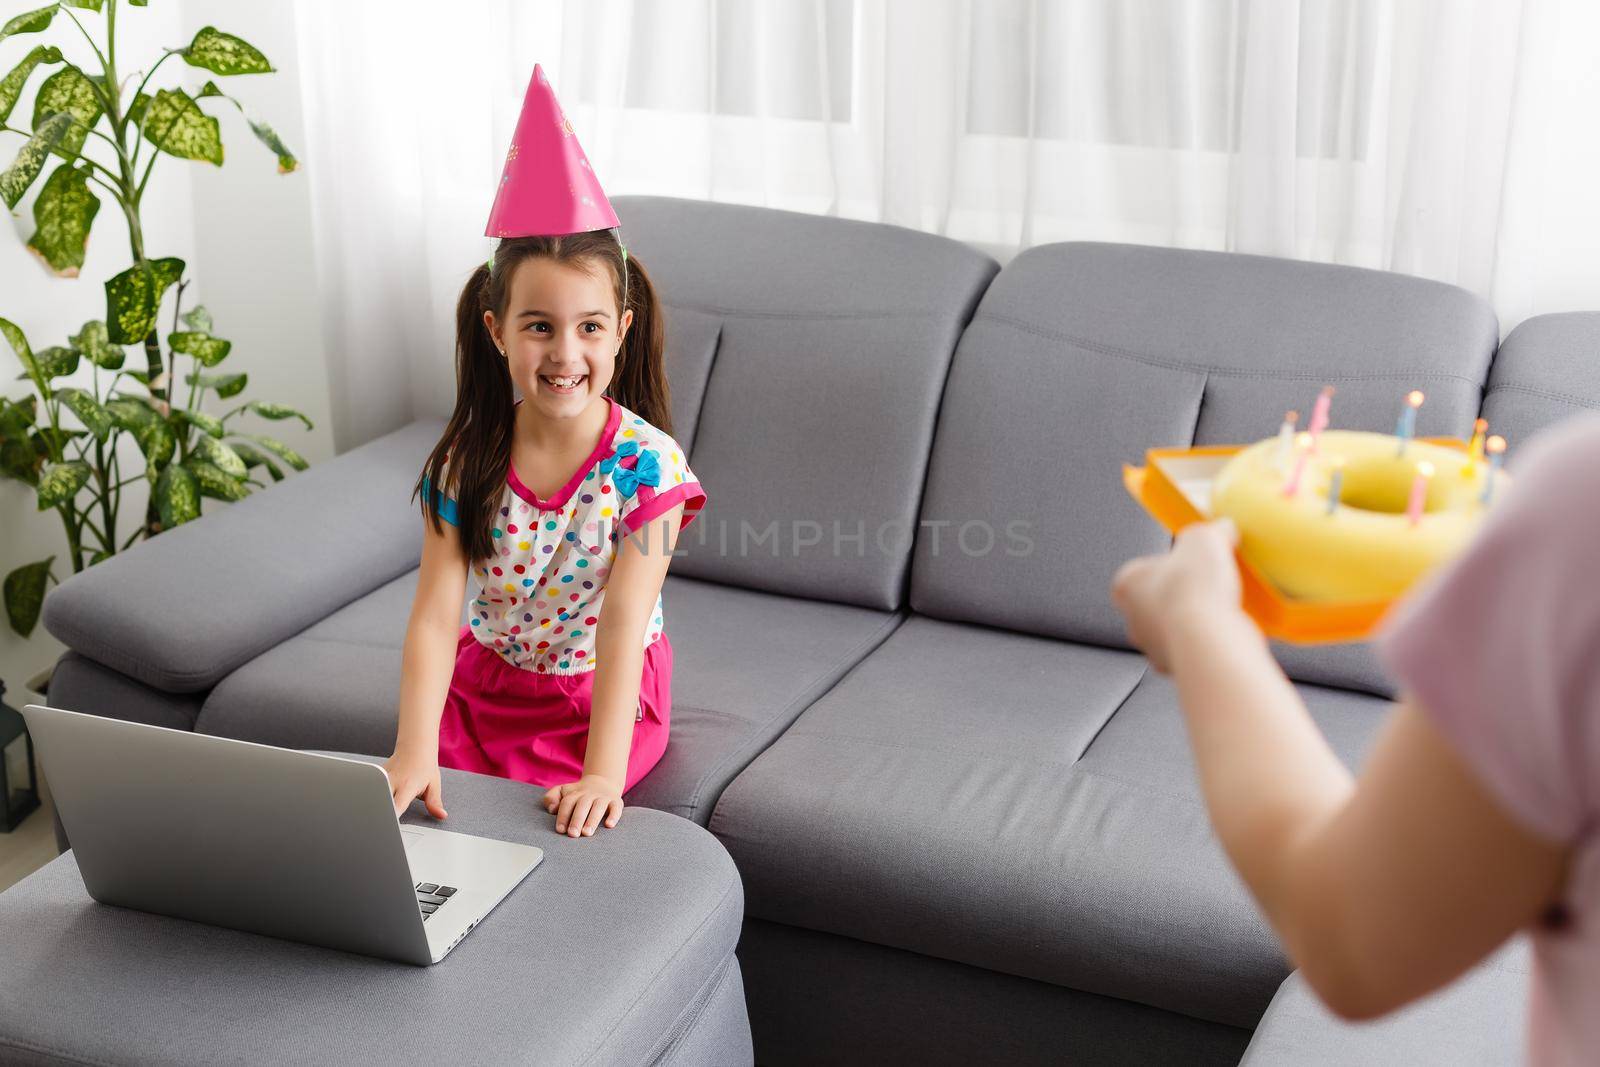 Happy girl sibling celebrating birthday via internet in quarantine time, self-isolation and family values, online birthday party. Congratulations animator via laptop, online. Stay at home